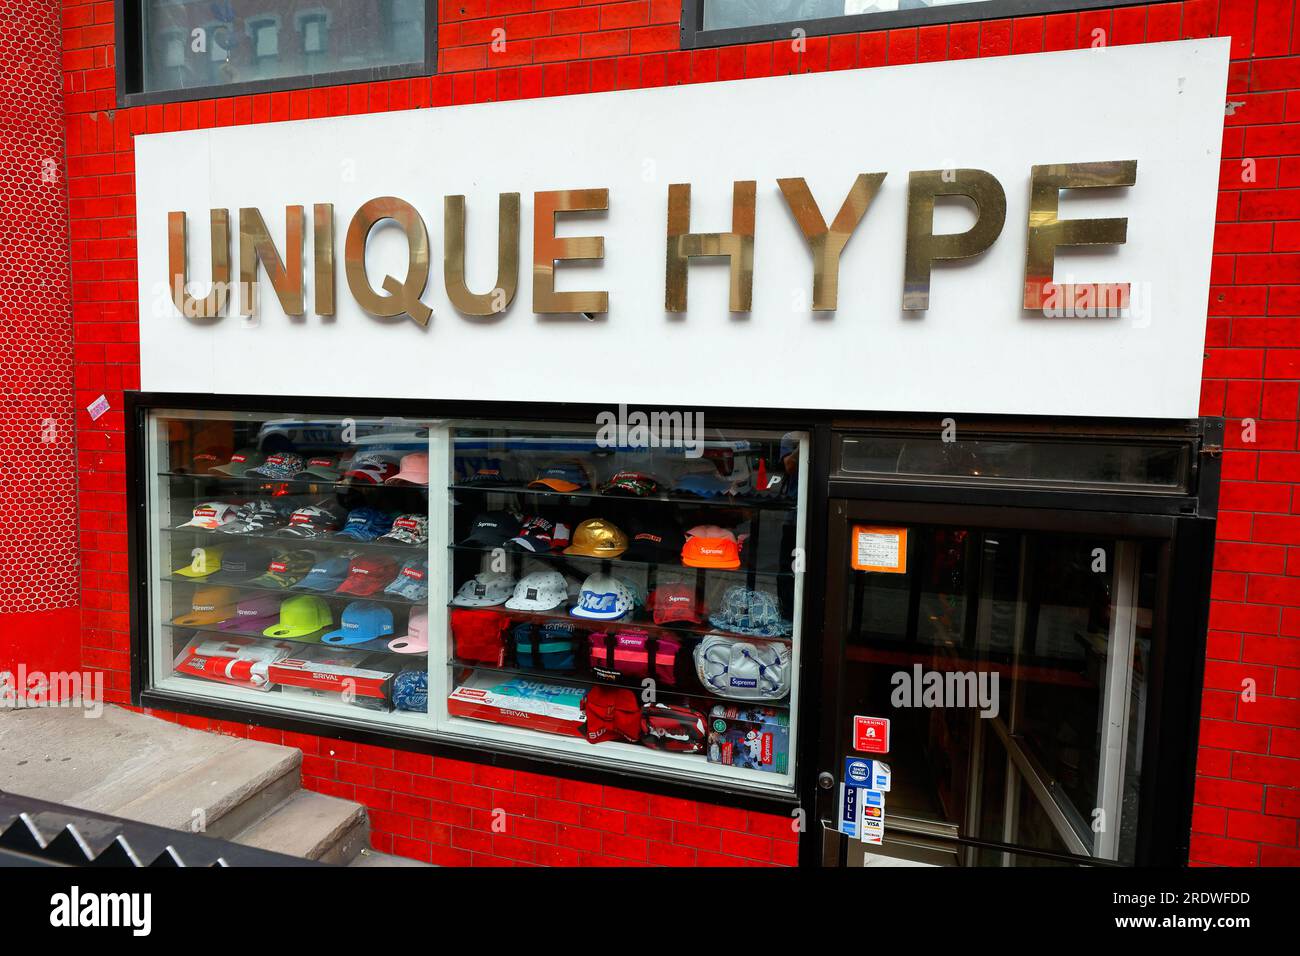 Unique Hype Collection, 10 Elizabeth St, New York, NYC storefront of a streetwear fashion boutique in Manhattan Chinatown. Stock Photo